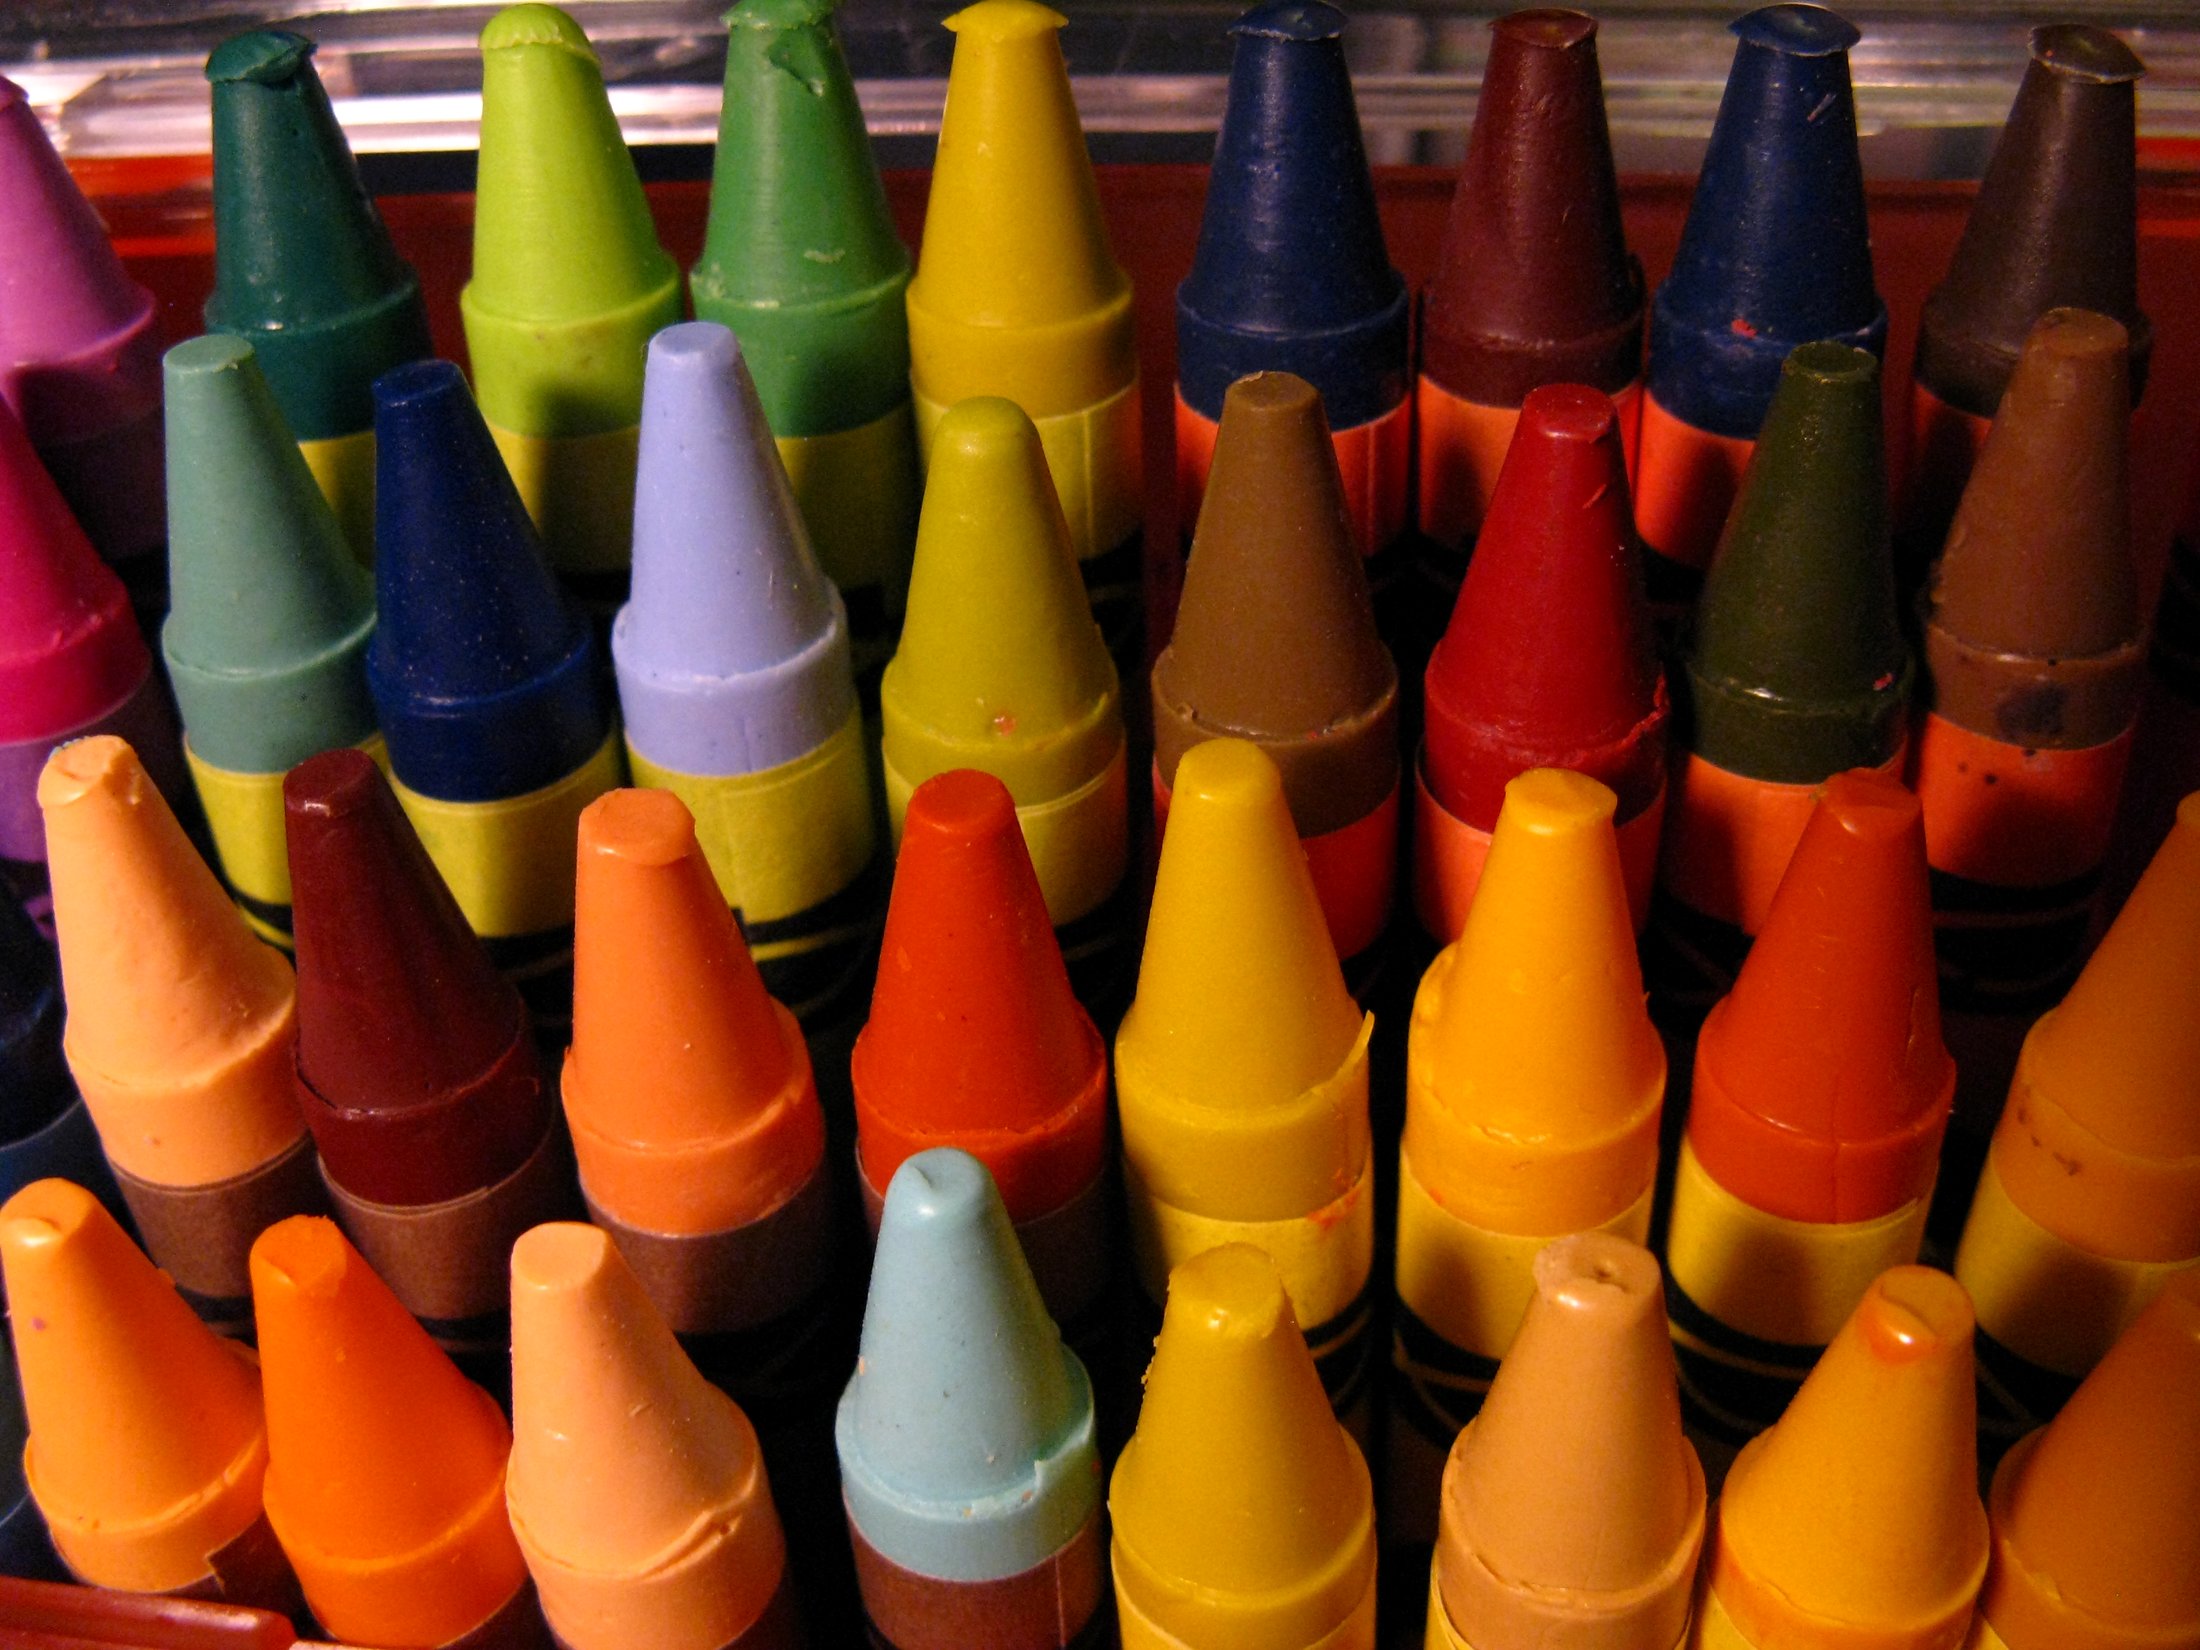 there are many crayons of varying colors